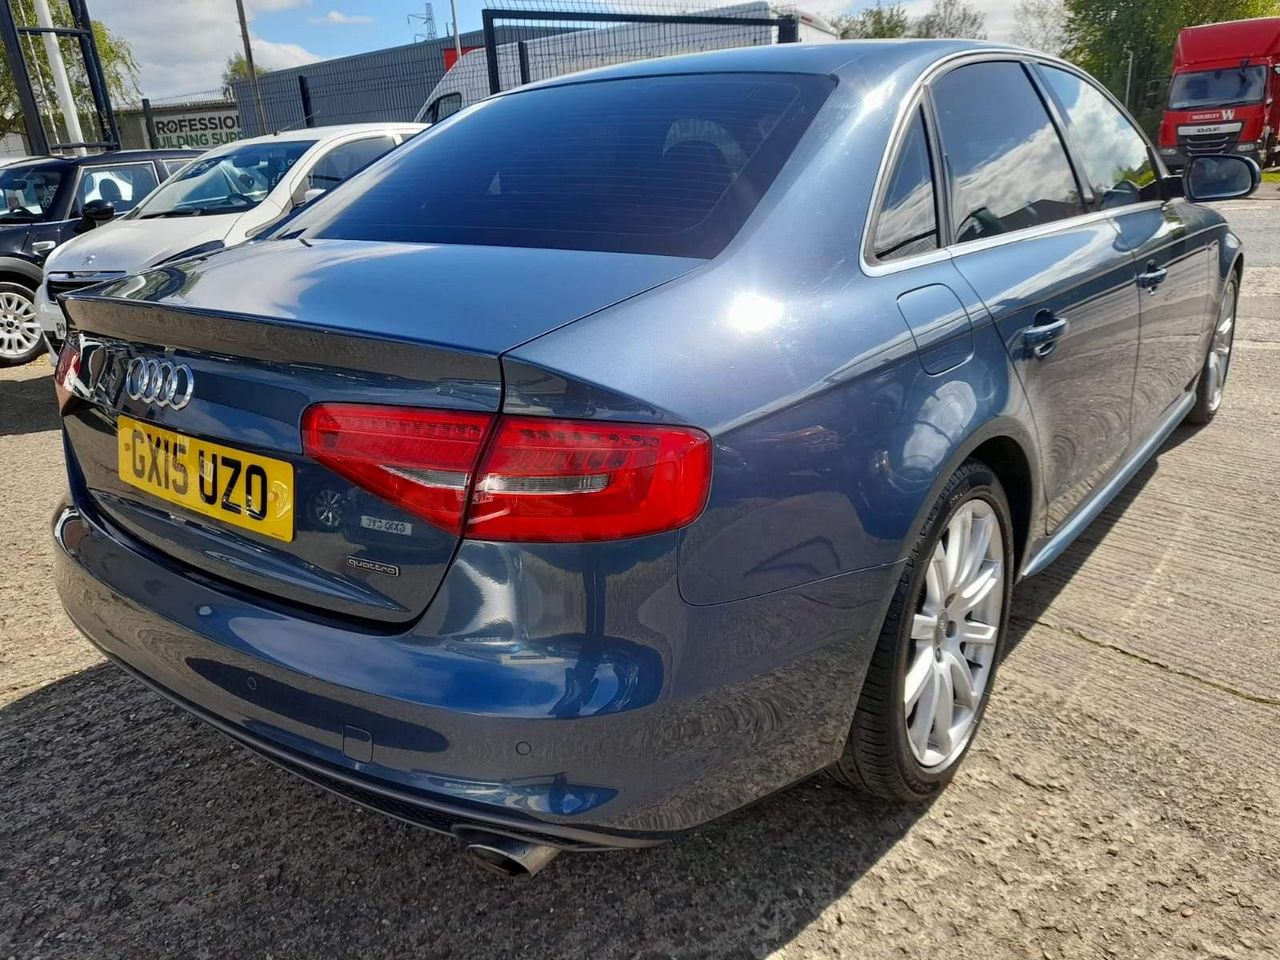 2015 Audi A4 3.0 TDI V6 S line S Tronic quattro Euro 5 (s/s) 4dr - Picture 11 of 47